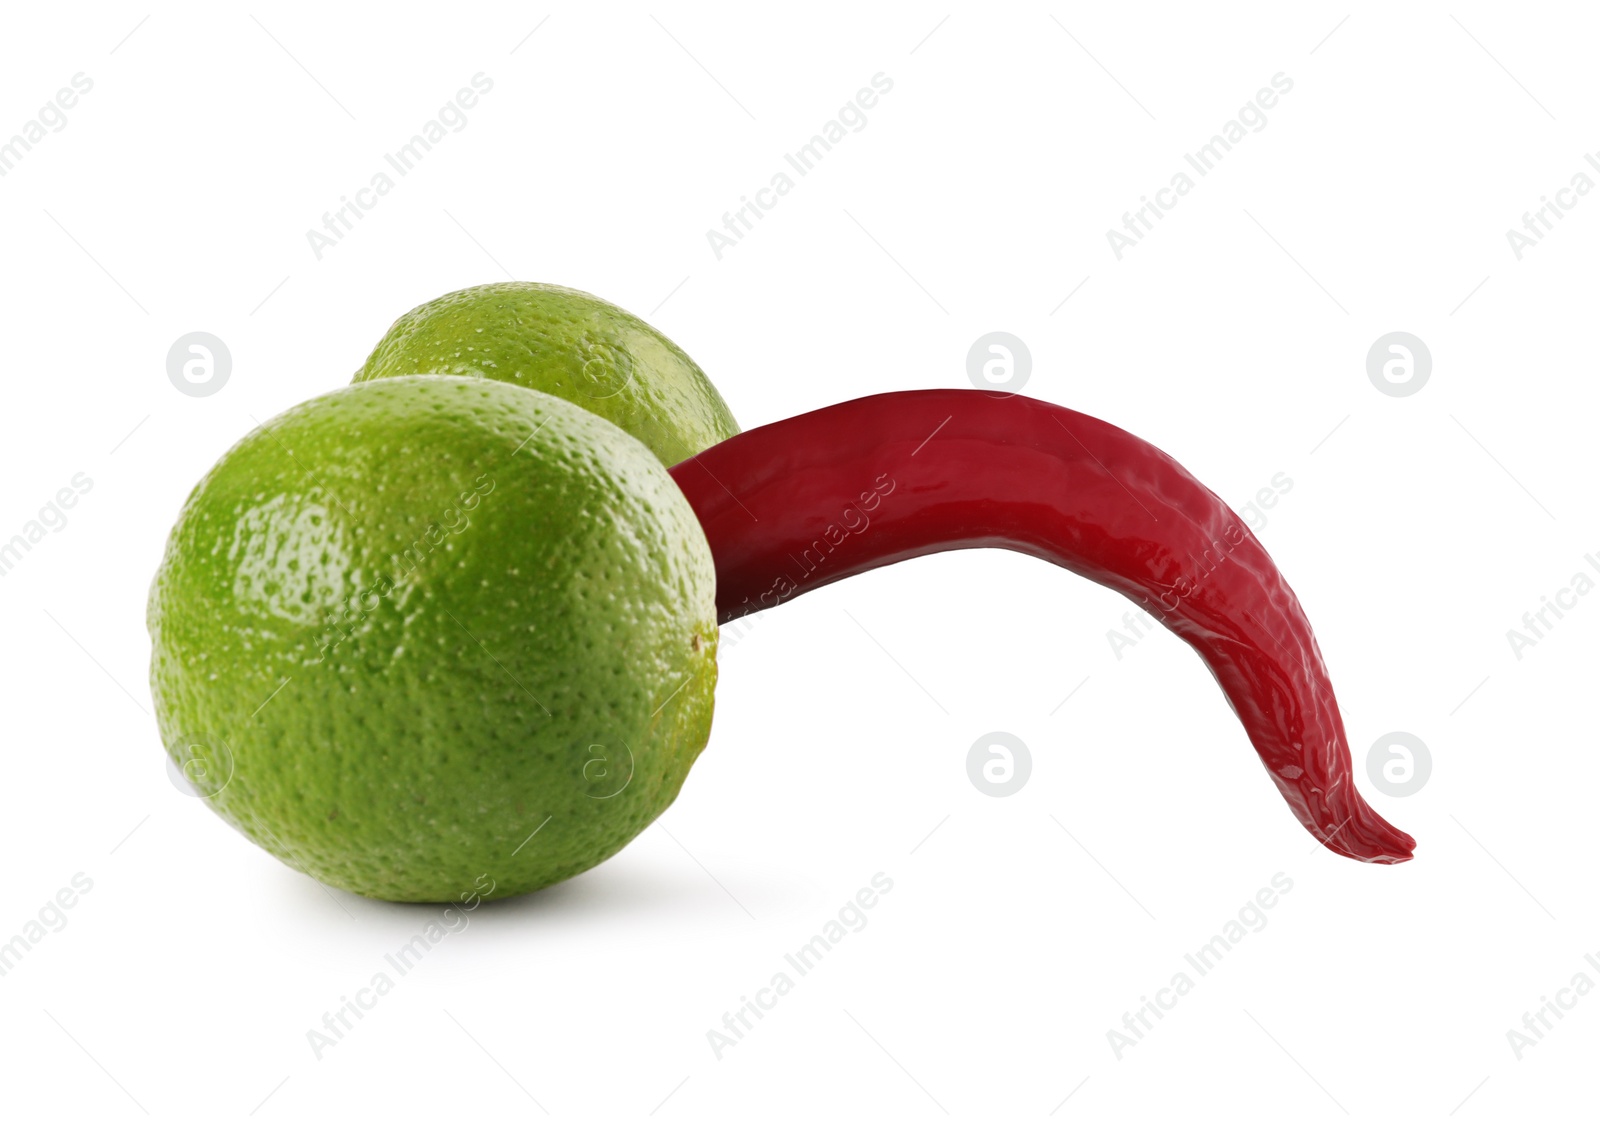 Image of Chili pepper and limes symbolizing male sexual organs on white background. Potency problem